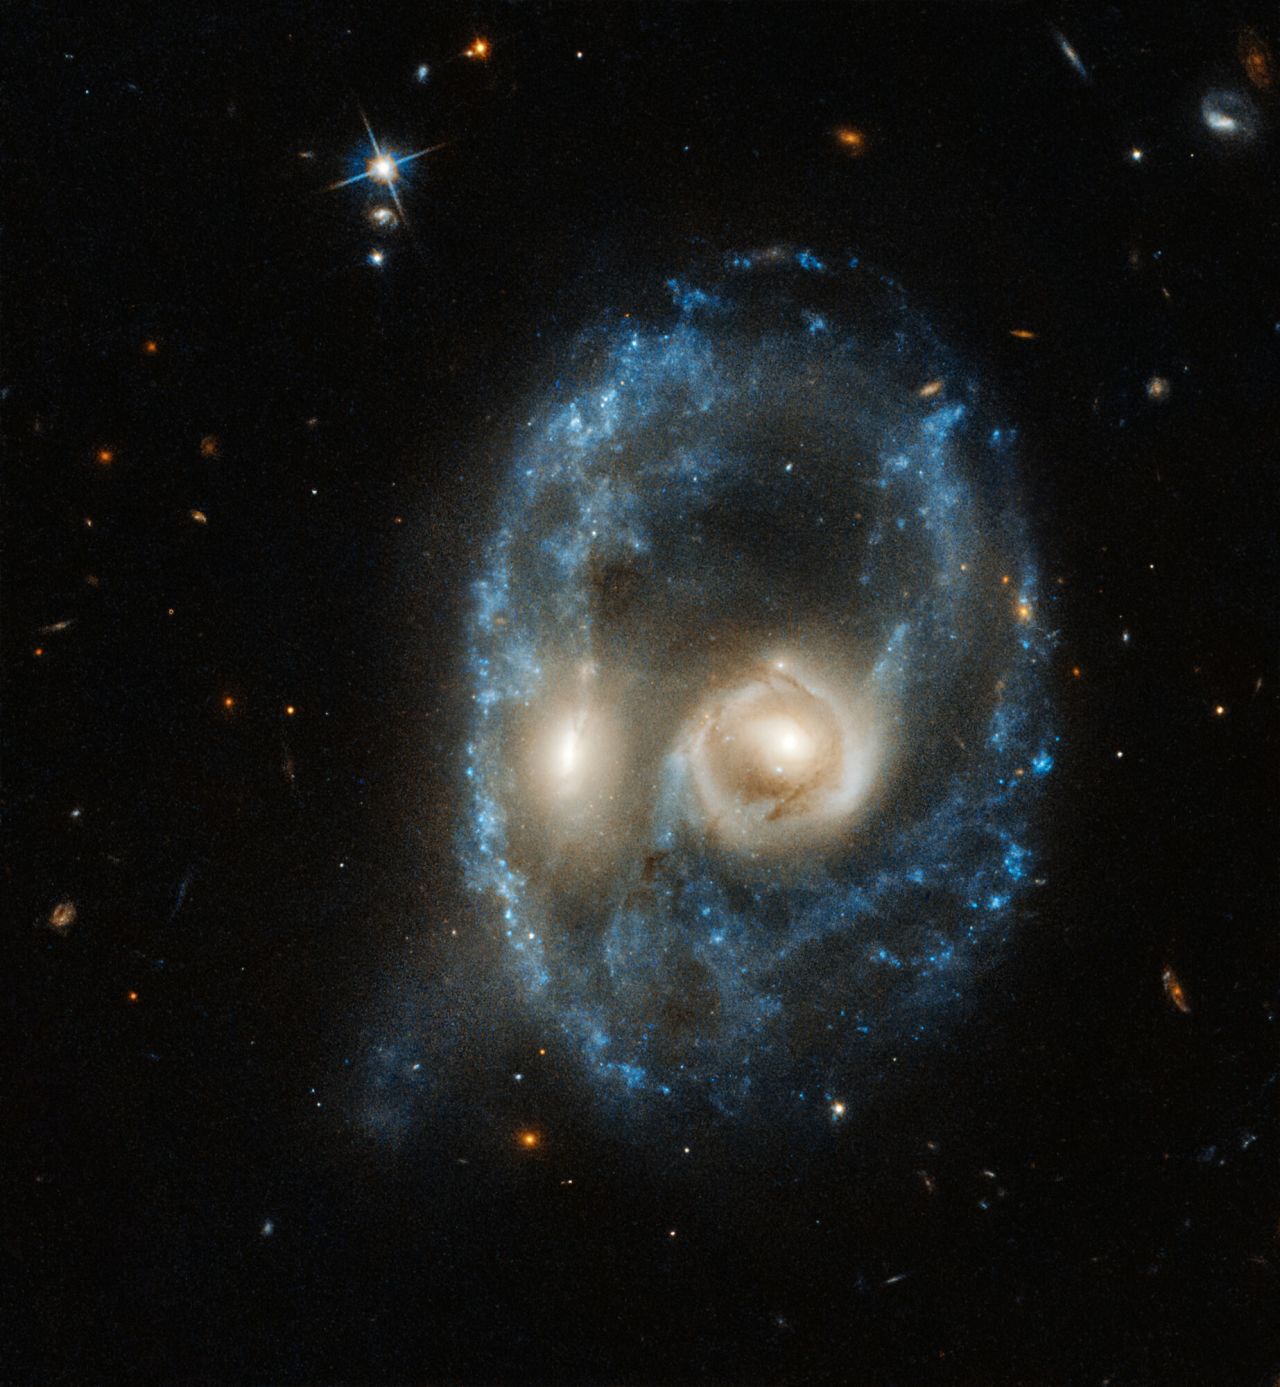 This new image from the NASA/ESA Hubble Space Telescope captures two galaxies of equal size in a collision that appears to resemble a ghostly face. This observation was made on 19 June 2019 in visible light by the telescope's Advanced Camera for Surveys.